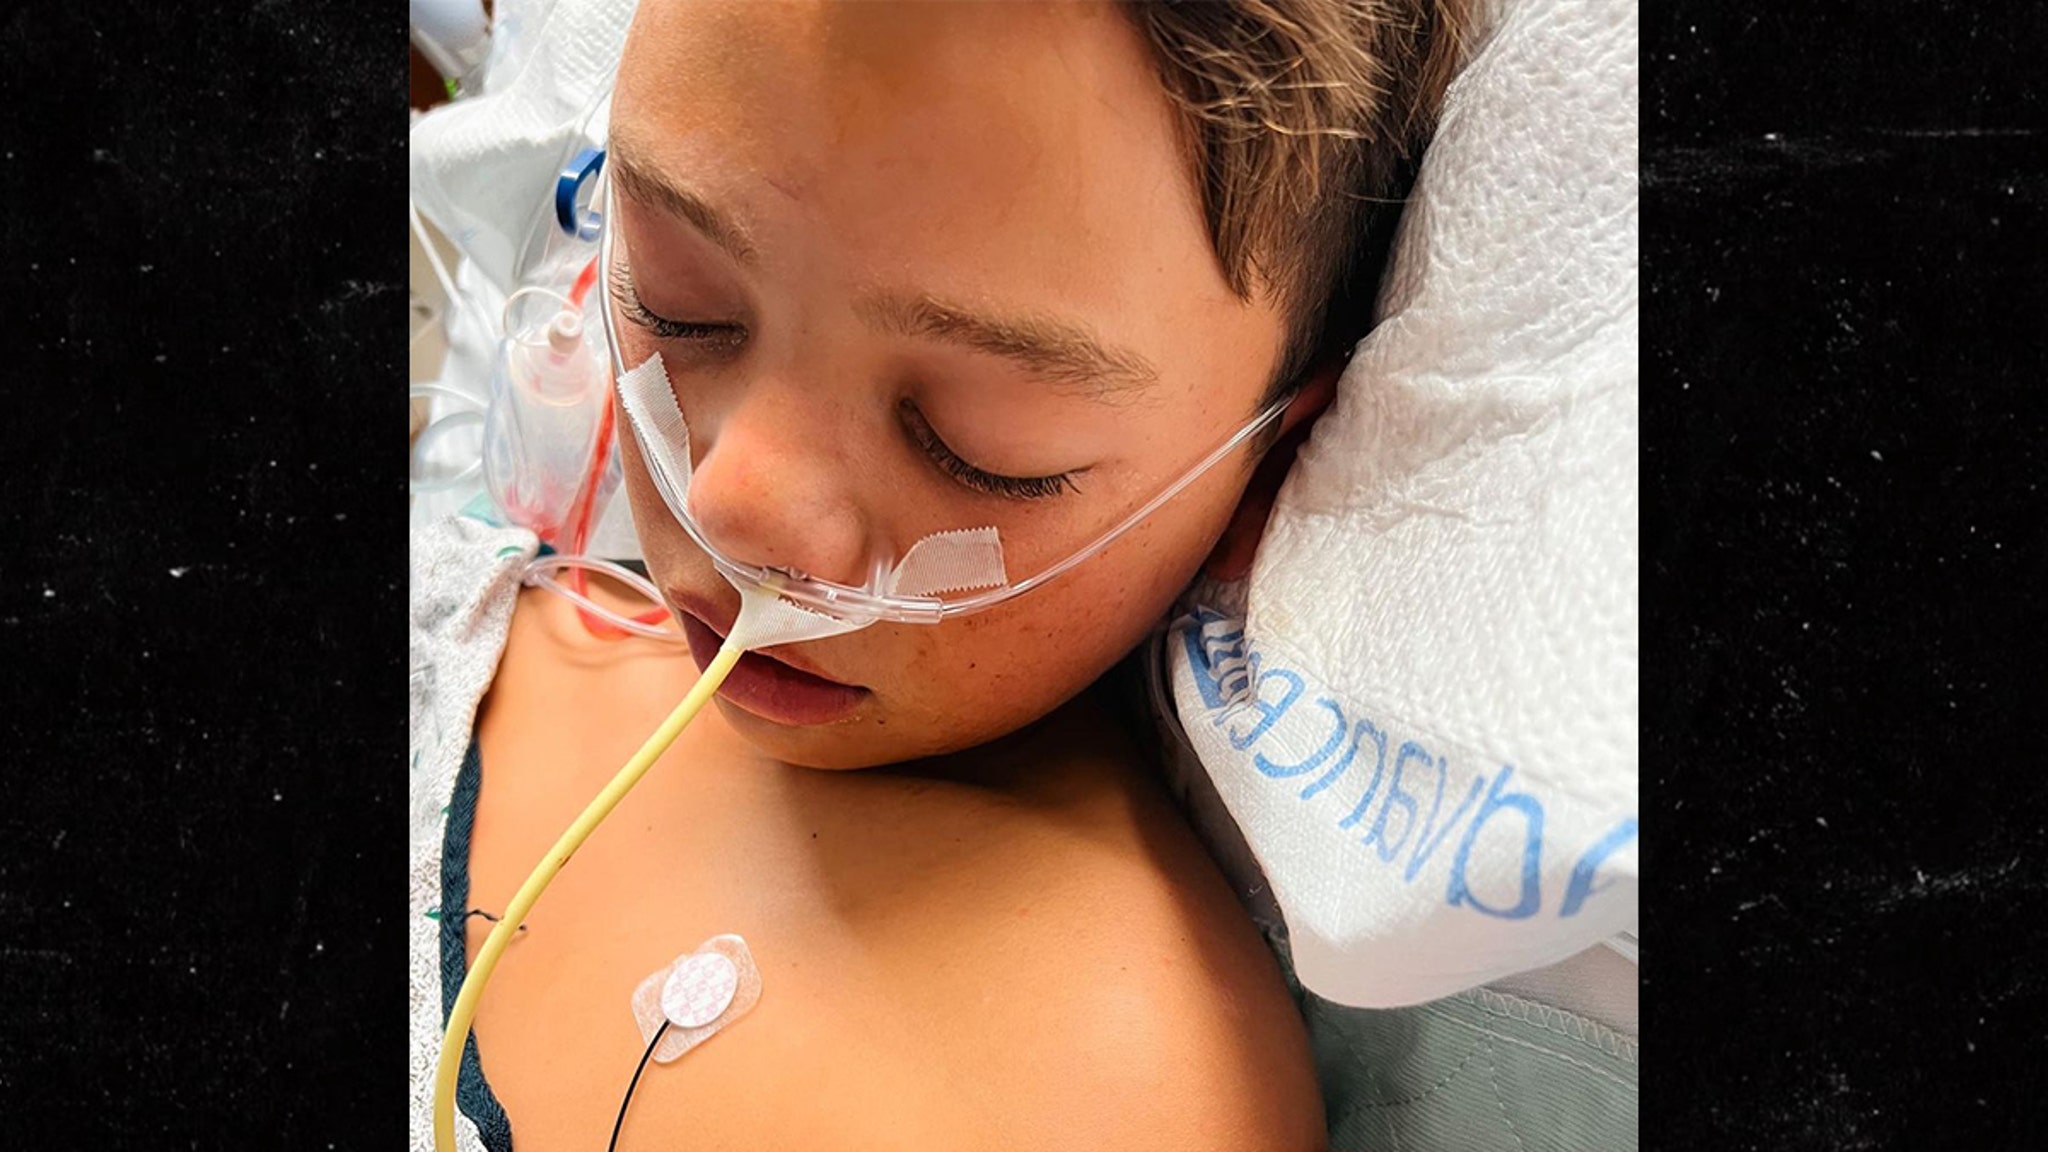 Little Leaguer Easton Oliverson's Breathing Tube Removed After Bunk Bed Fall